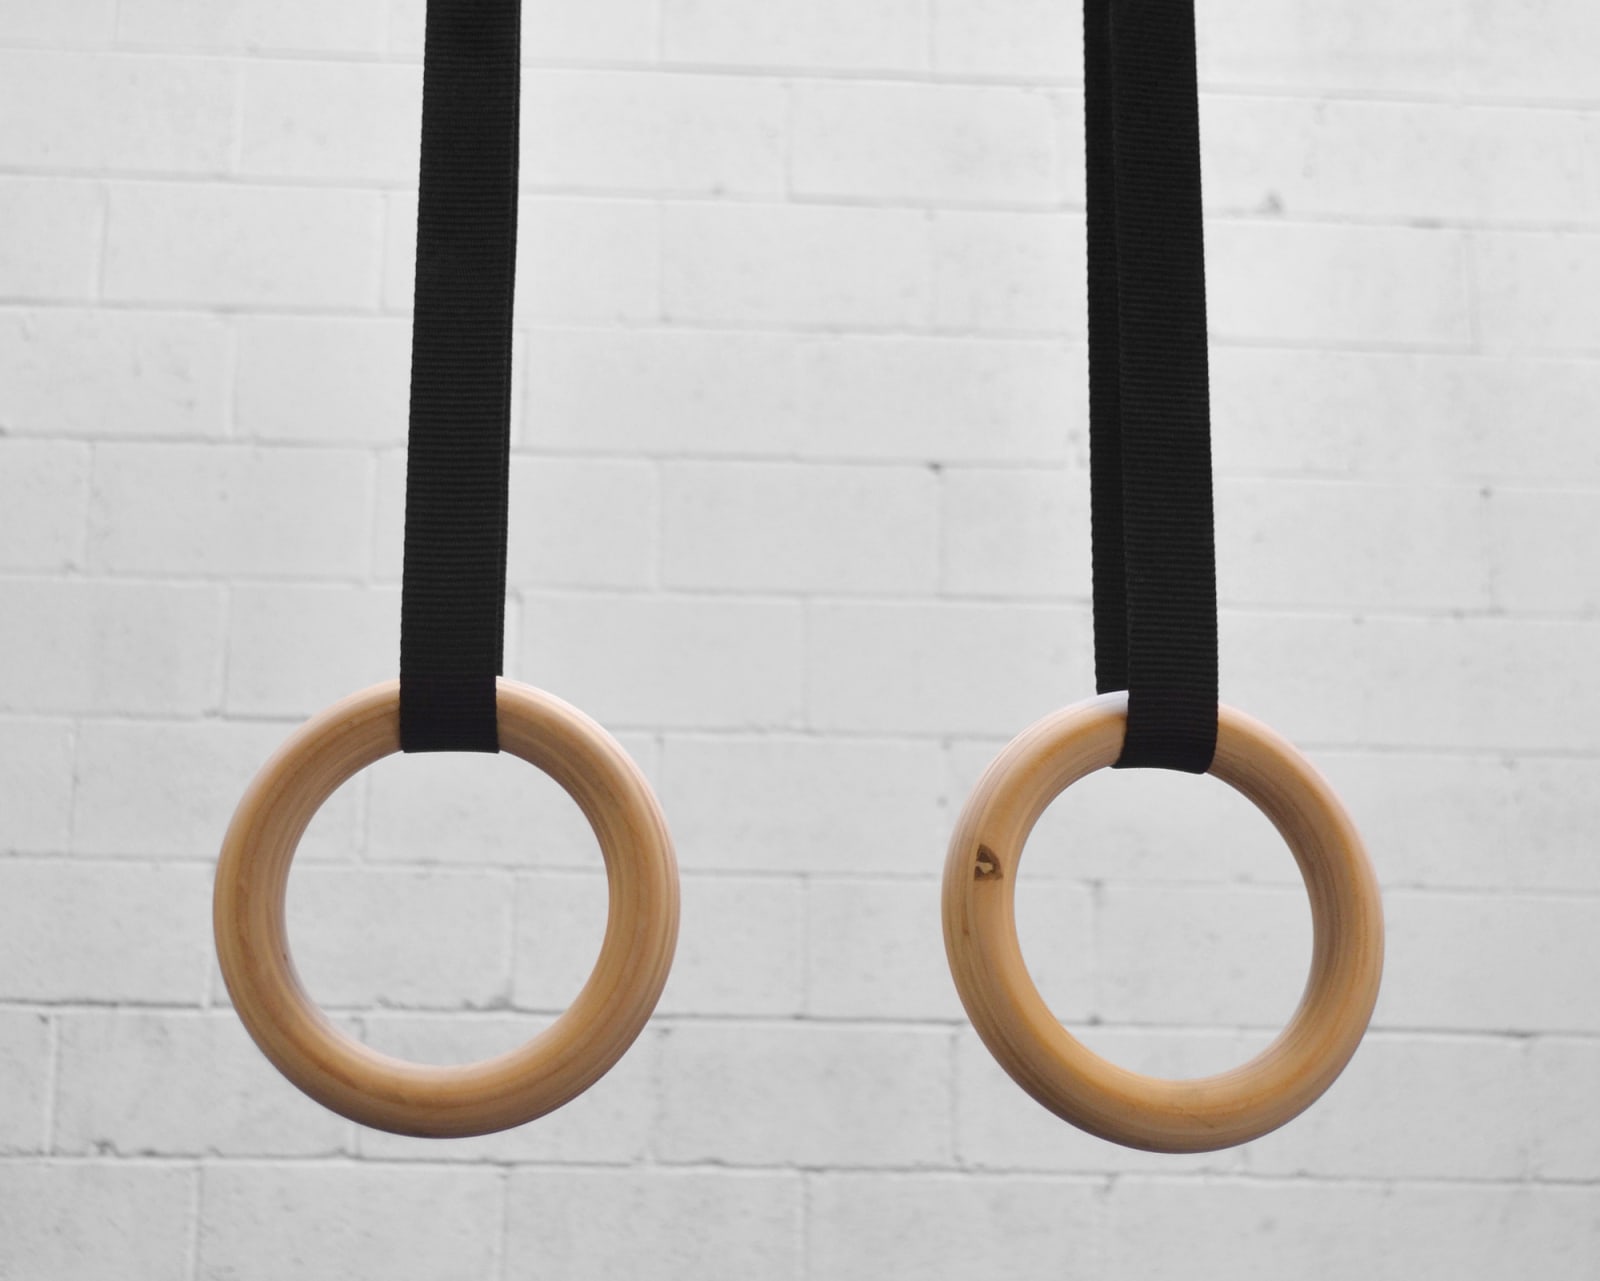 gracht cel maat Kids Wood Gymnastic Rings - 1.1" Thickness | Rogue Fitness